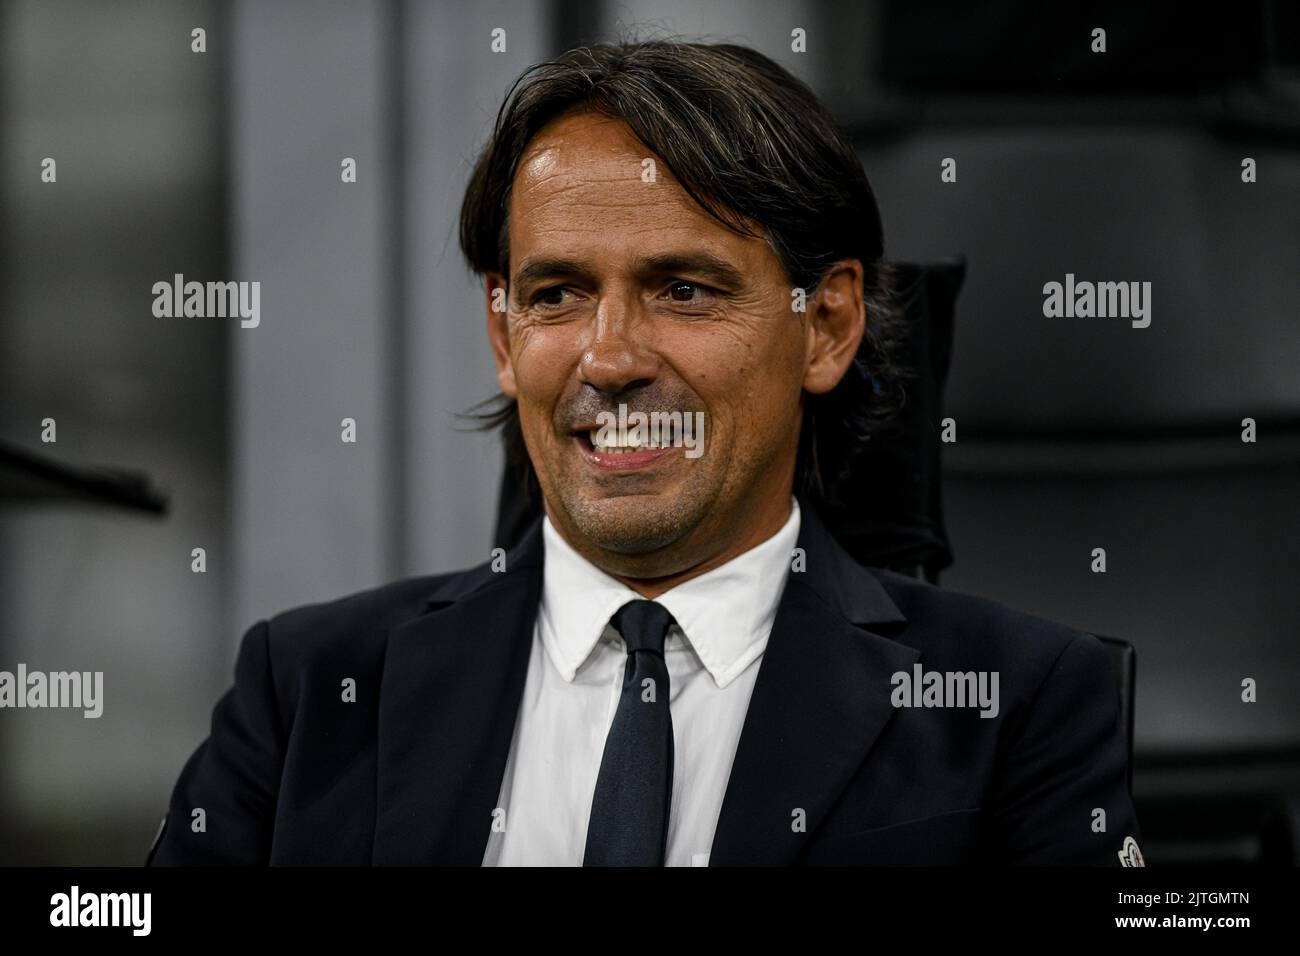 Simone Inzaghi, head coach of FC Internazionale during the Italian Serie A football match FC Internazionale vs Cremonese at San Siro stadium in Milan, Italy on 30/08/22 Stock Photo